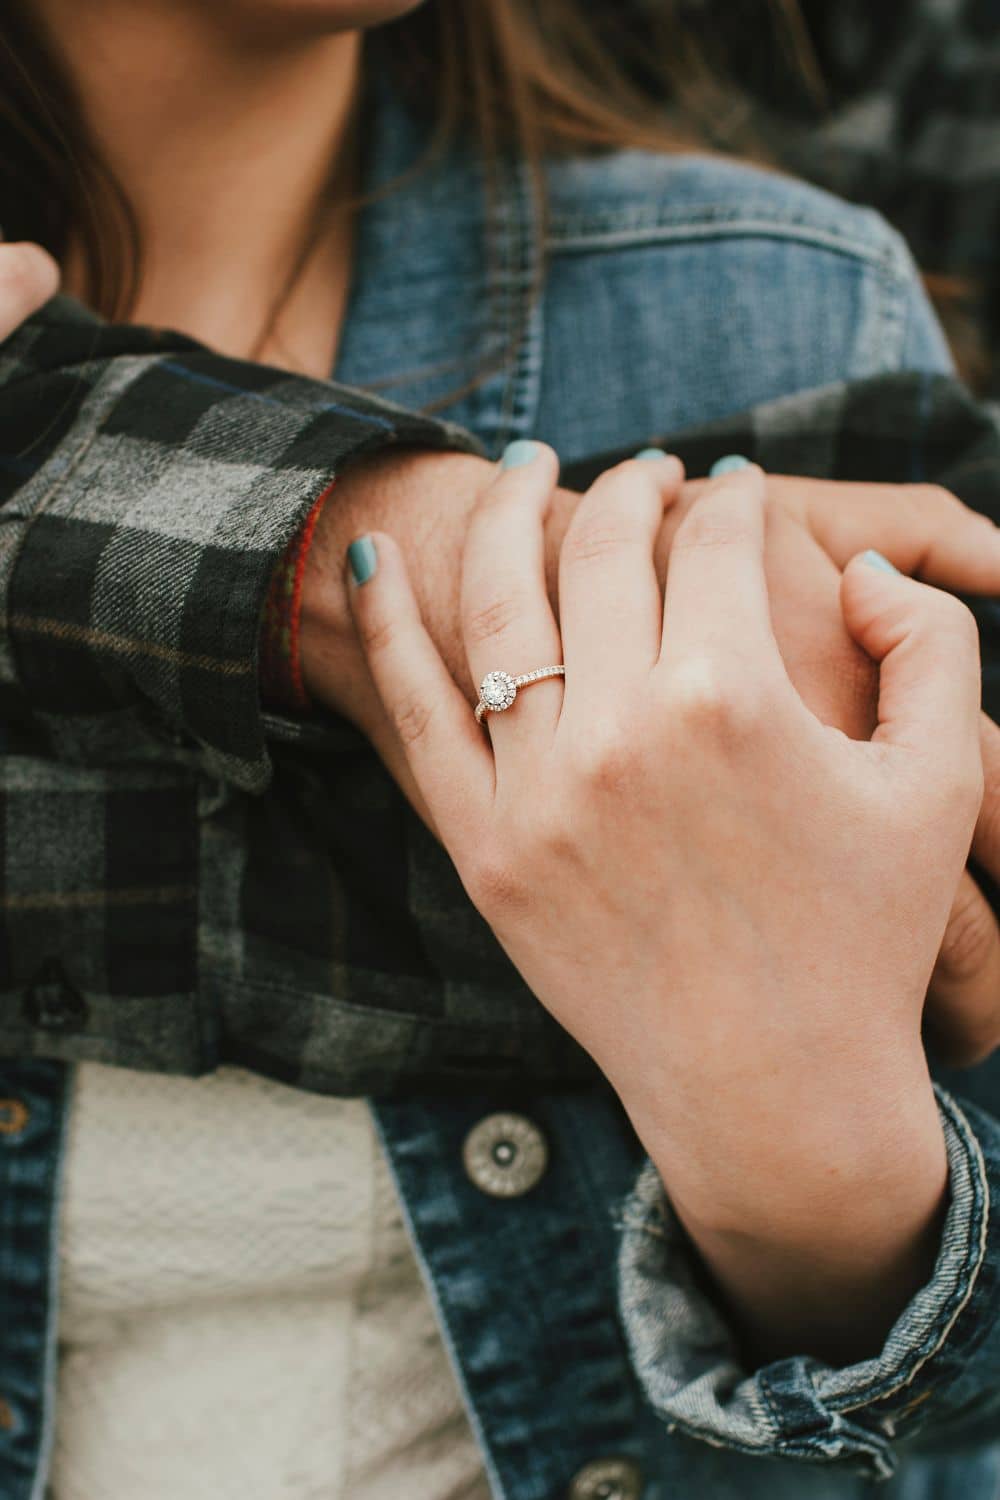 How to Select the Perfect Engagement Ring